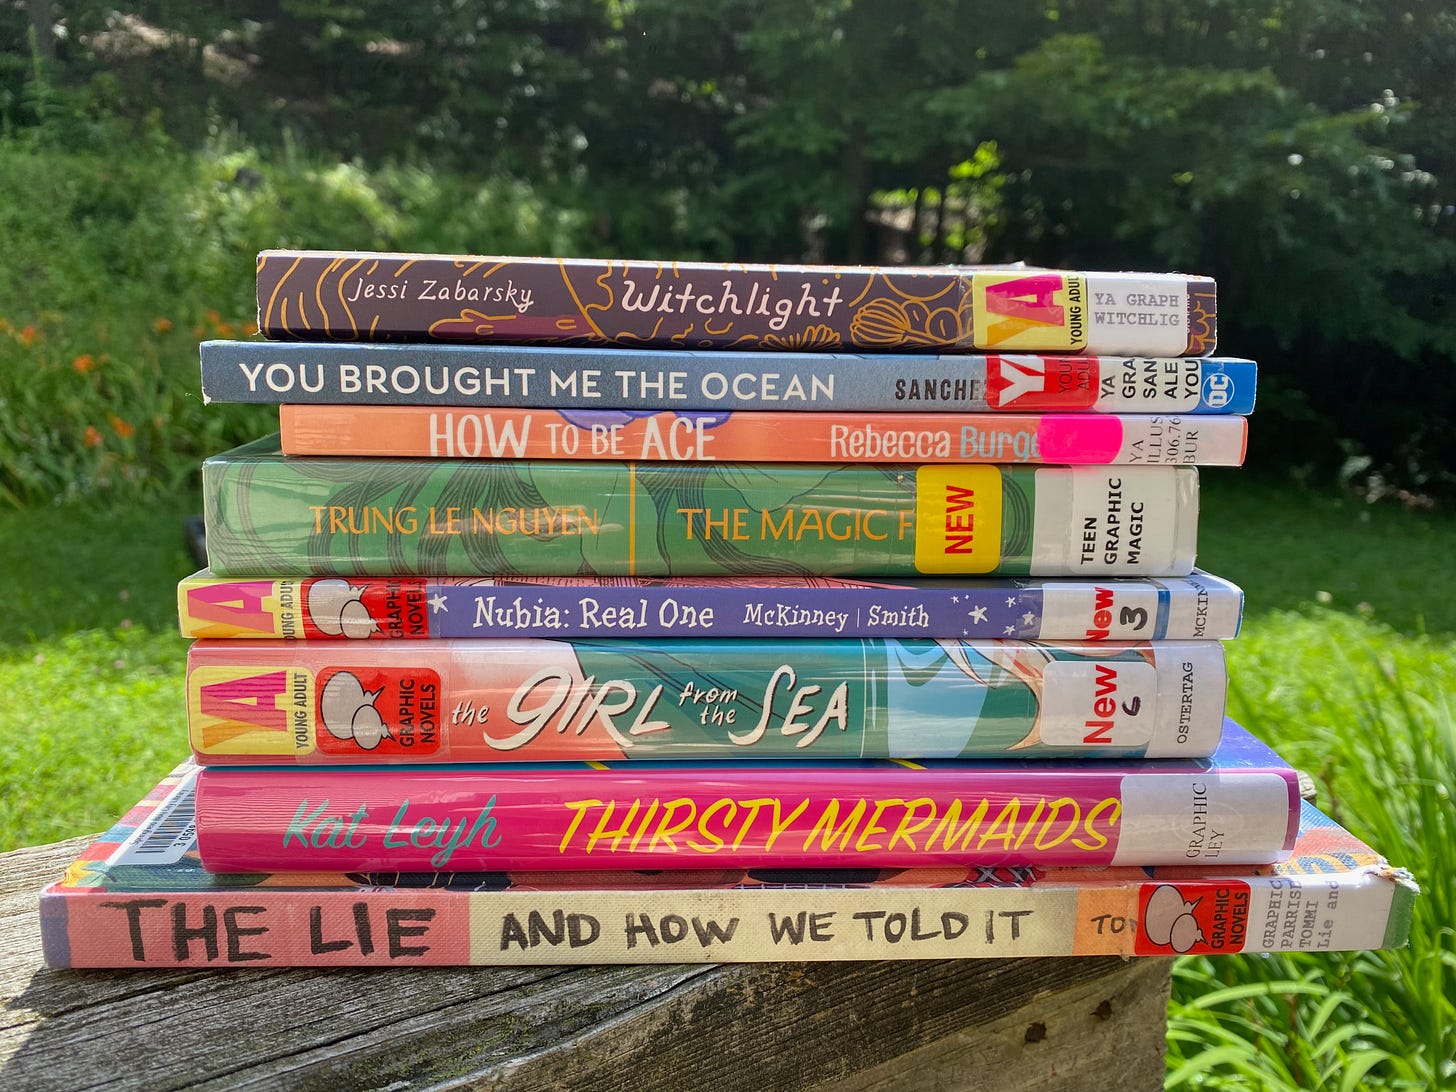 A stack of graphic novels sitting on a wooden railing in front of a sunny lawn: The Lie and How We Told It, Thirsty Mermaids, The Girl from the Sea, Nubia, The Magic Fish, How to be Ace, You Brought Me the Ocean, and Witchlight.